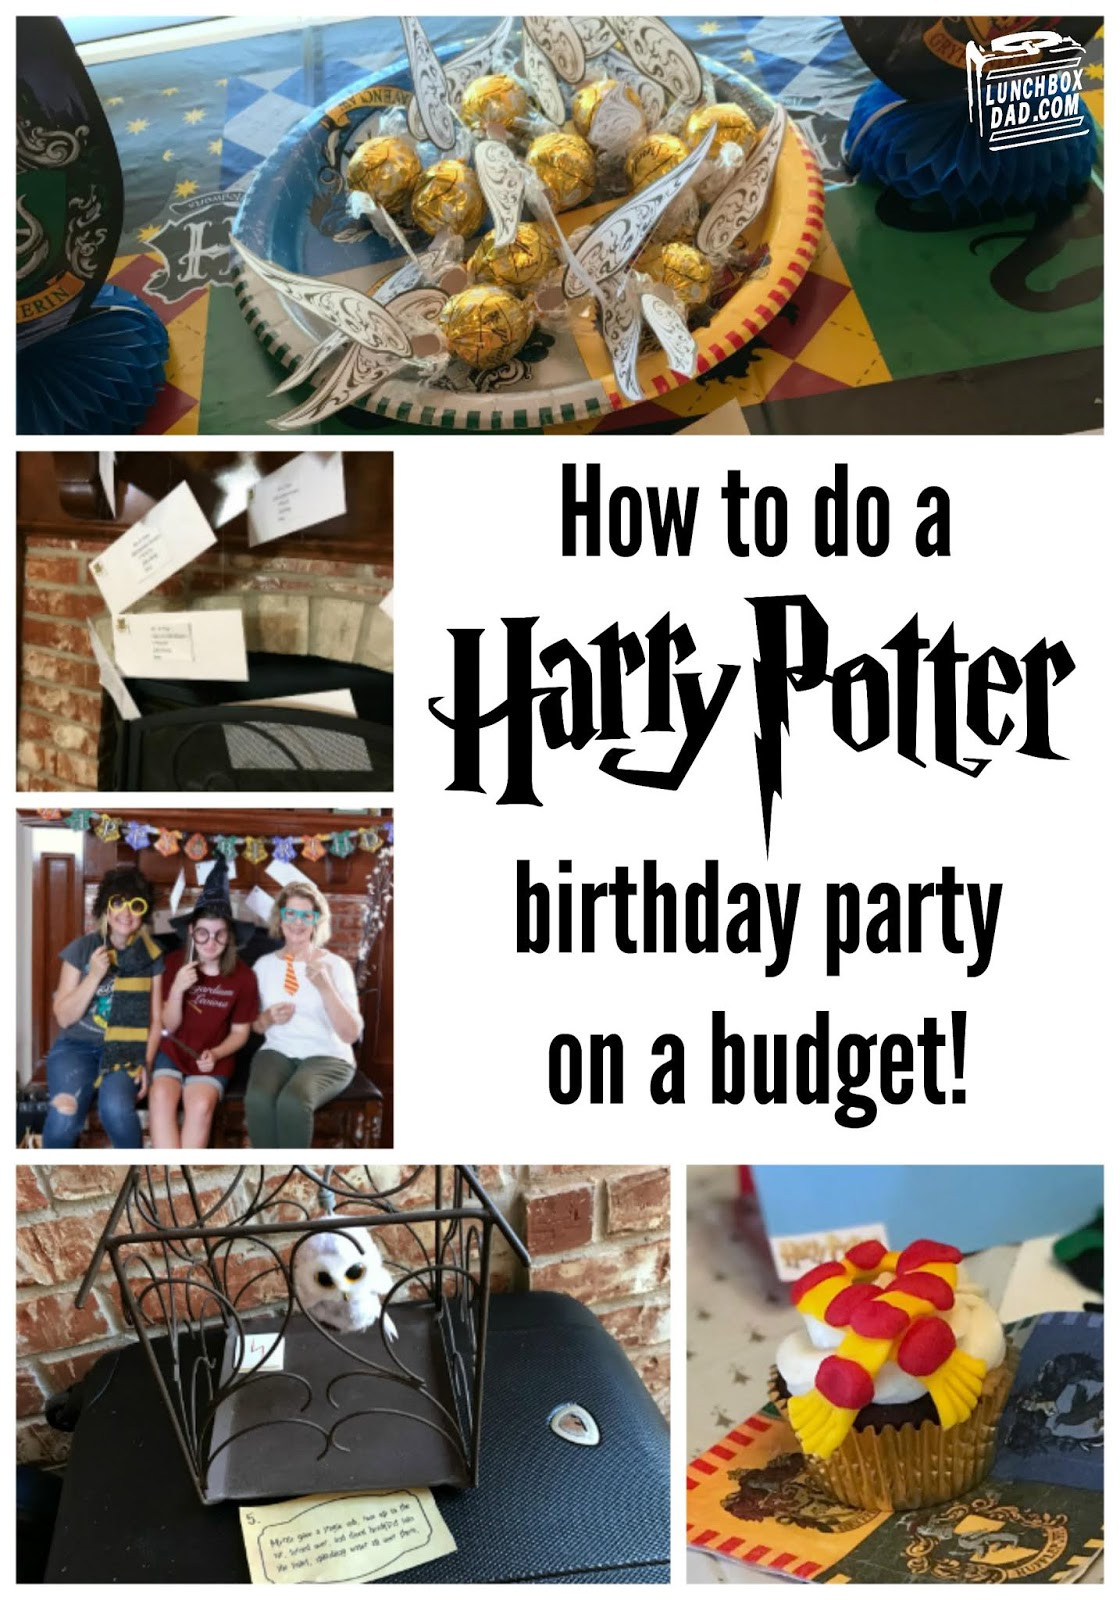 Harry Potter Birthday Party
 Lunchbox Dad Harry Potter Birthday Party Ideas on a Bud